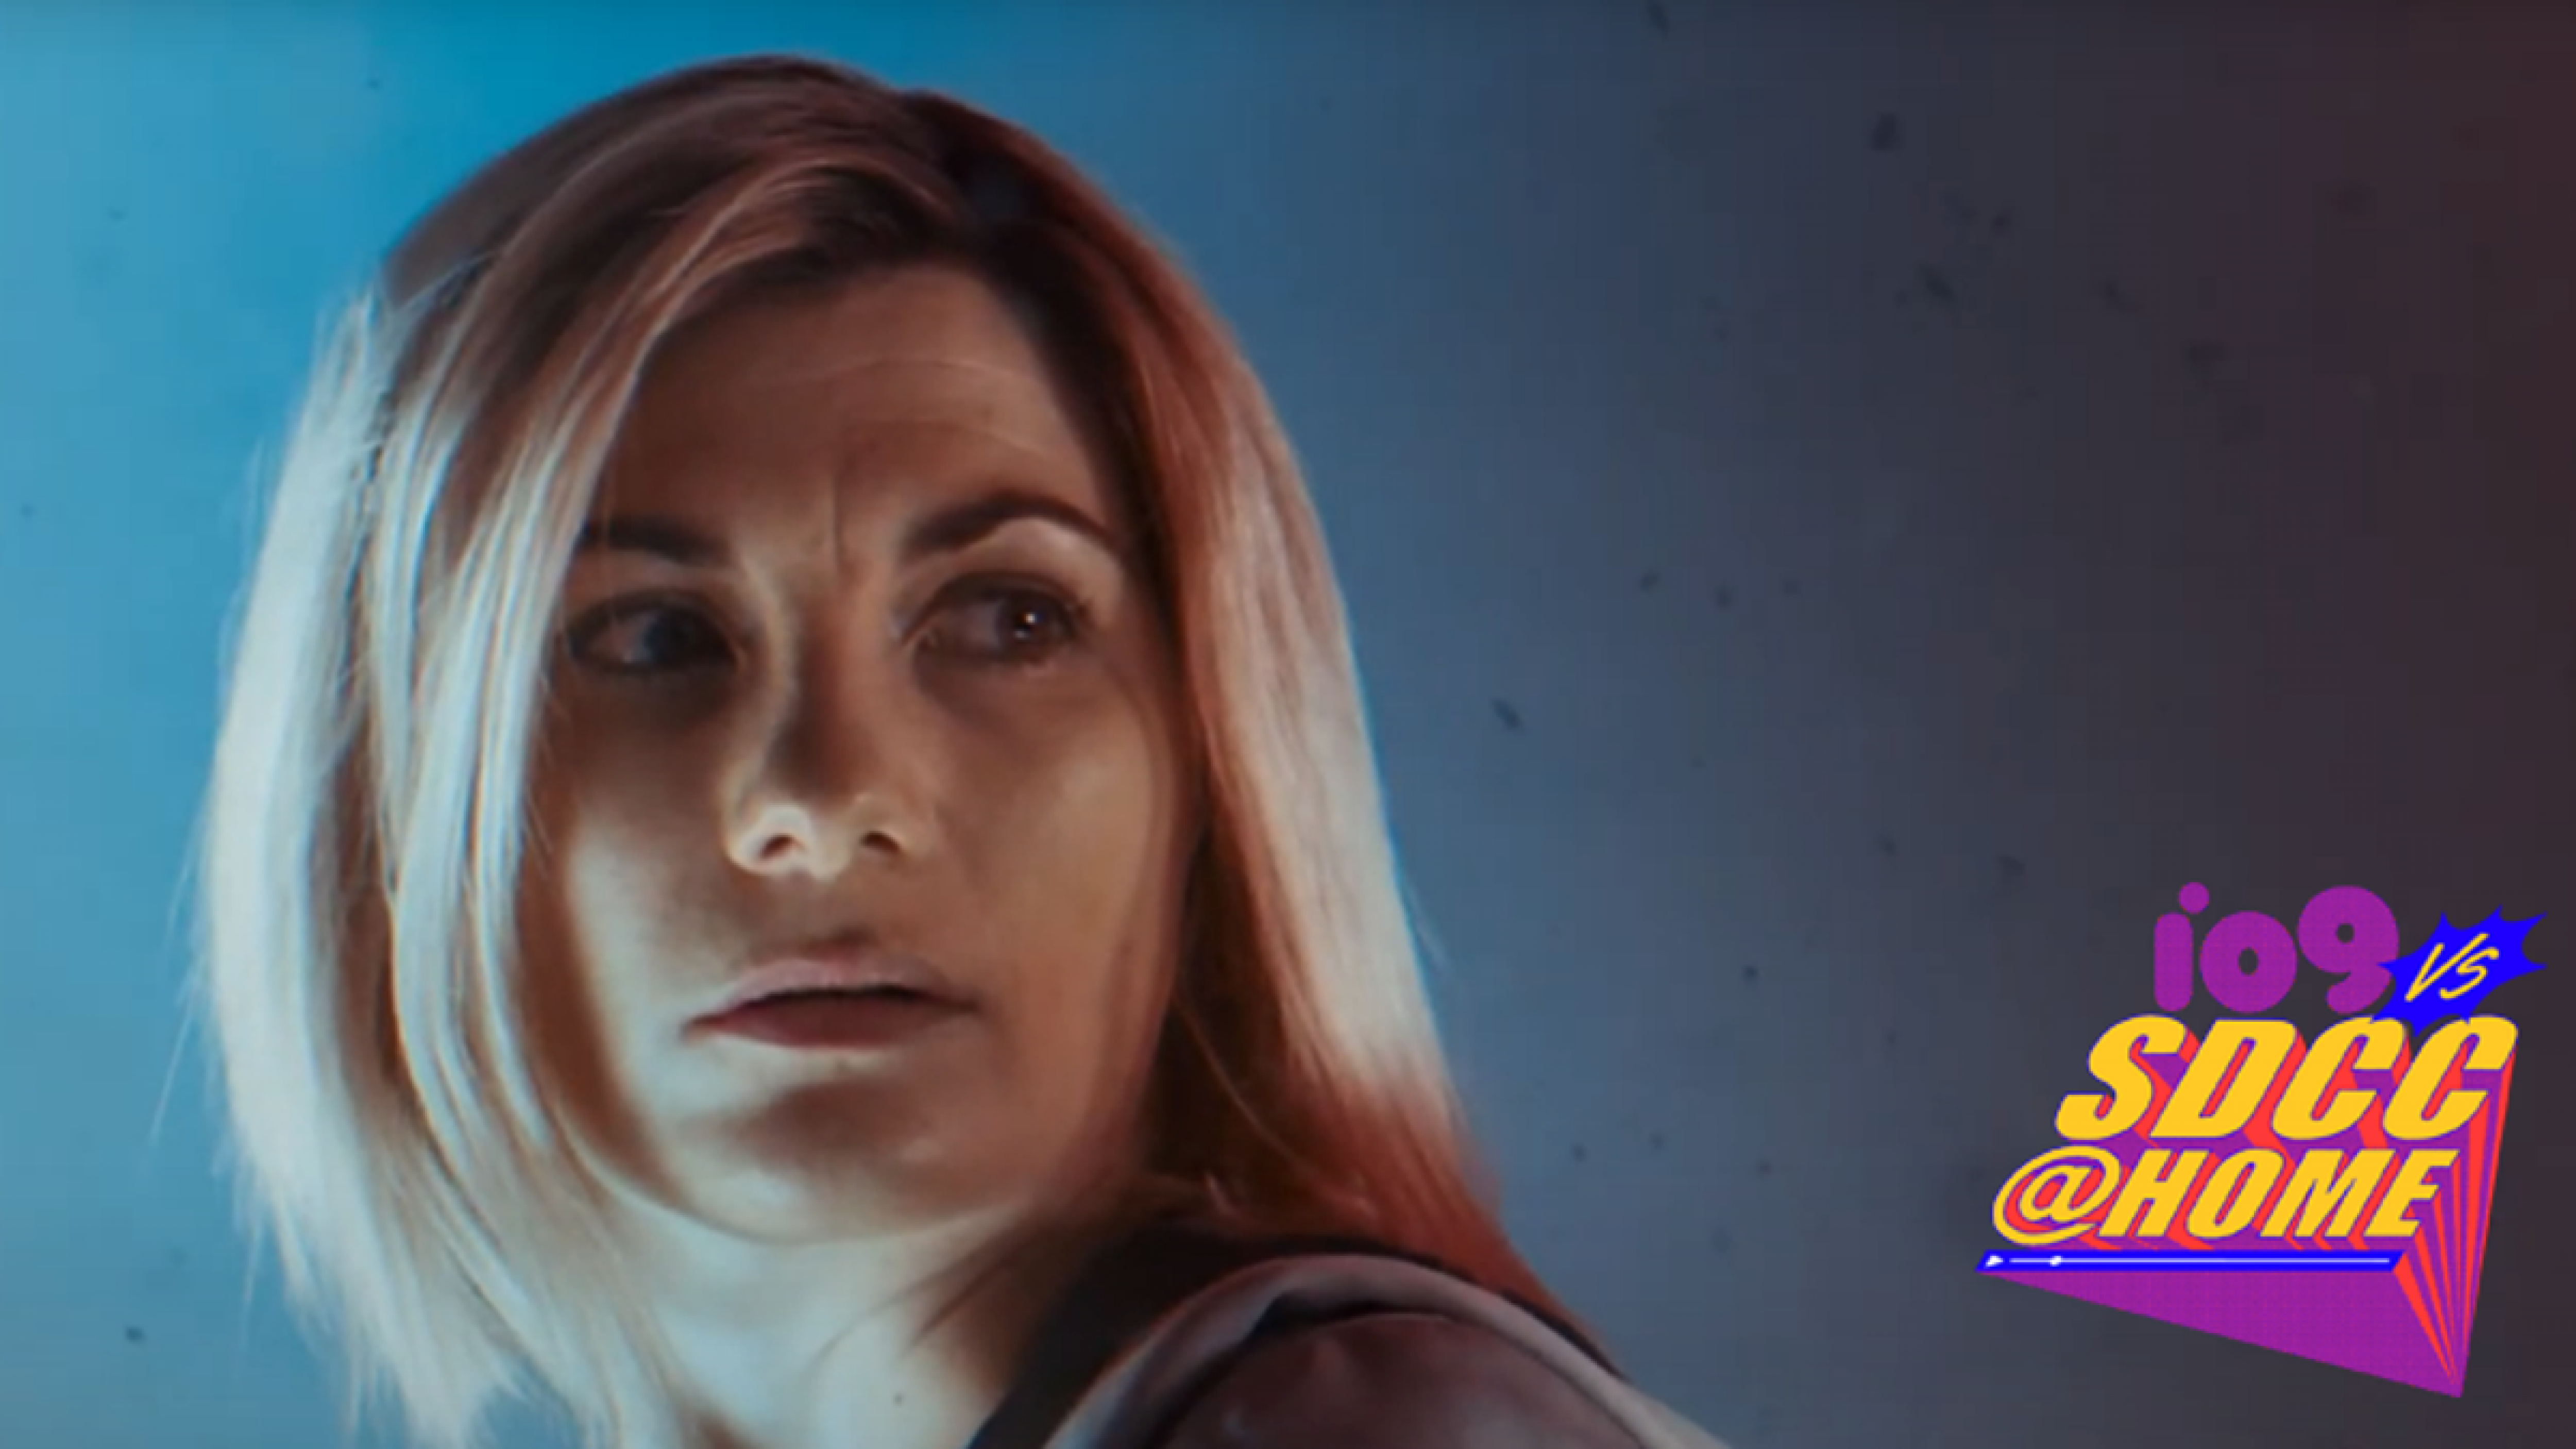 Doctor Who Season 13’s SDCC 2021 Trailer Brings in New Friends and New Foes